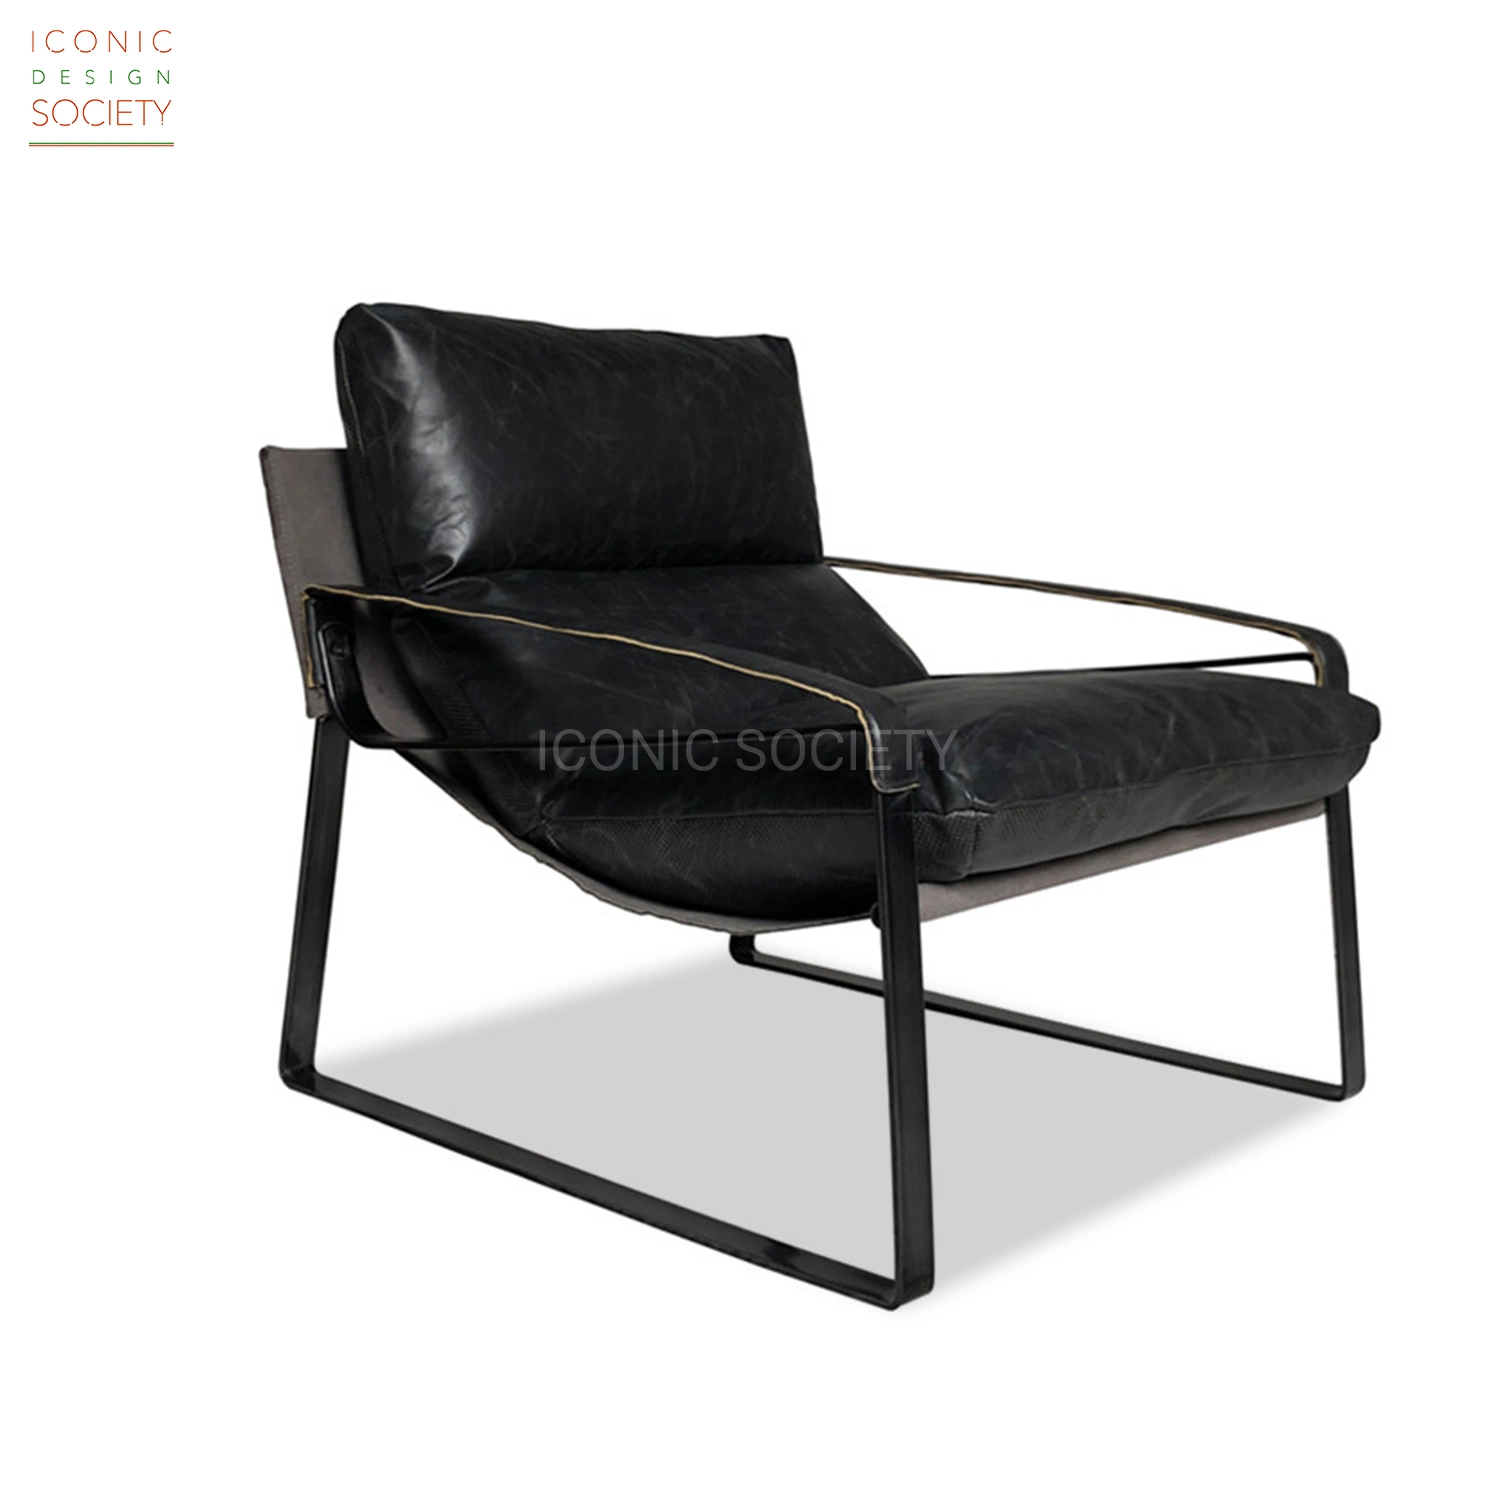 Industrial Metal Frame Meeting Room Hotel Lobby Sitting Living Room Furniture Home Office Genuine Leather Leisure Accent Lounge Chair